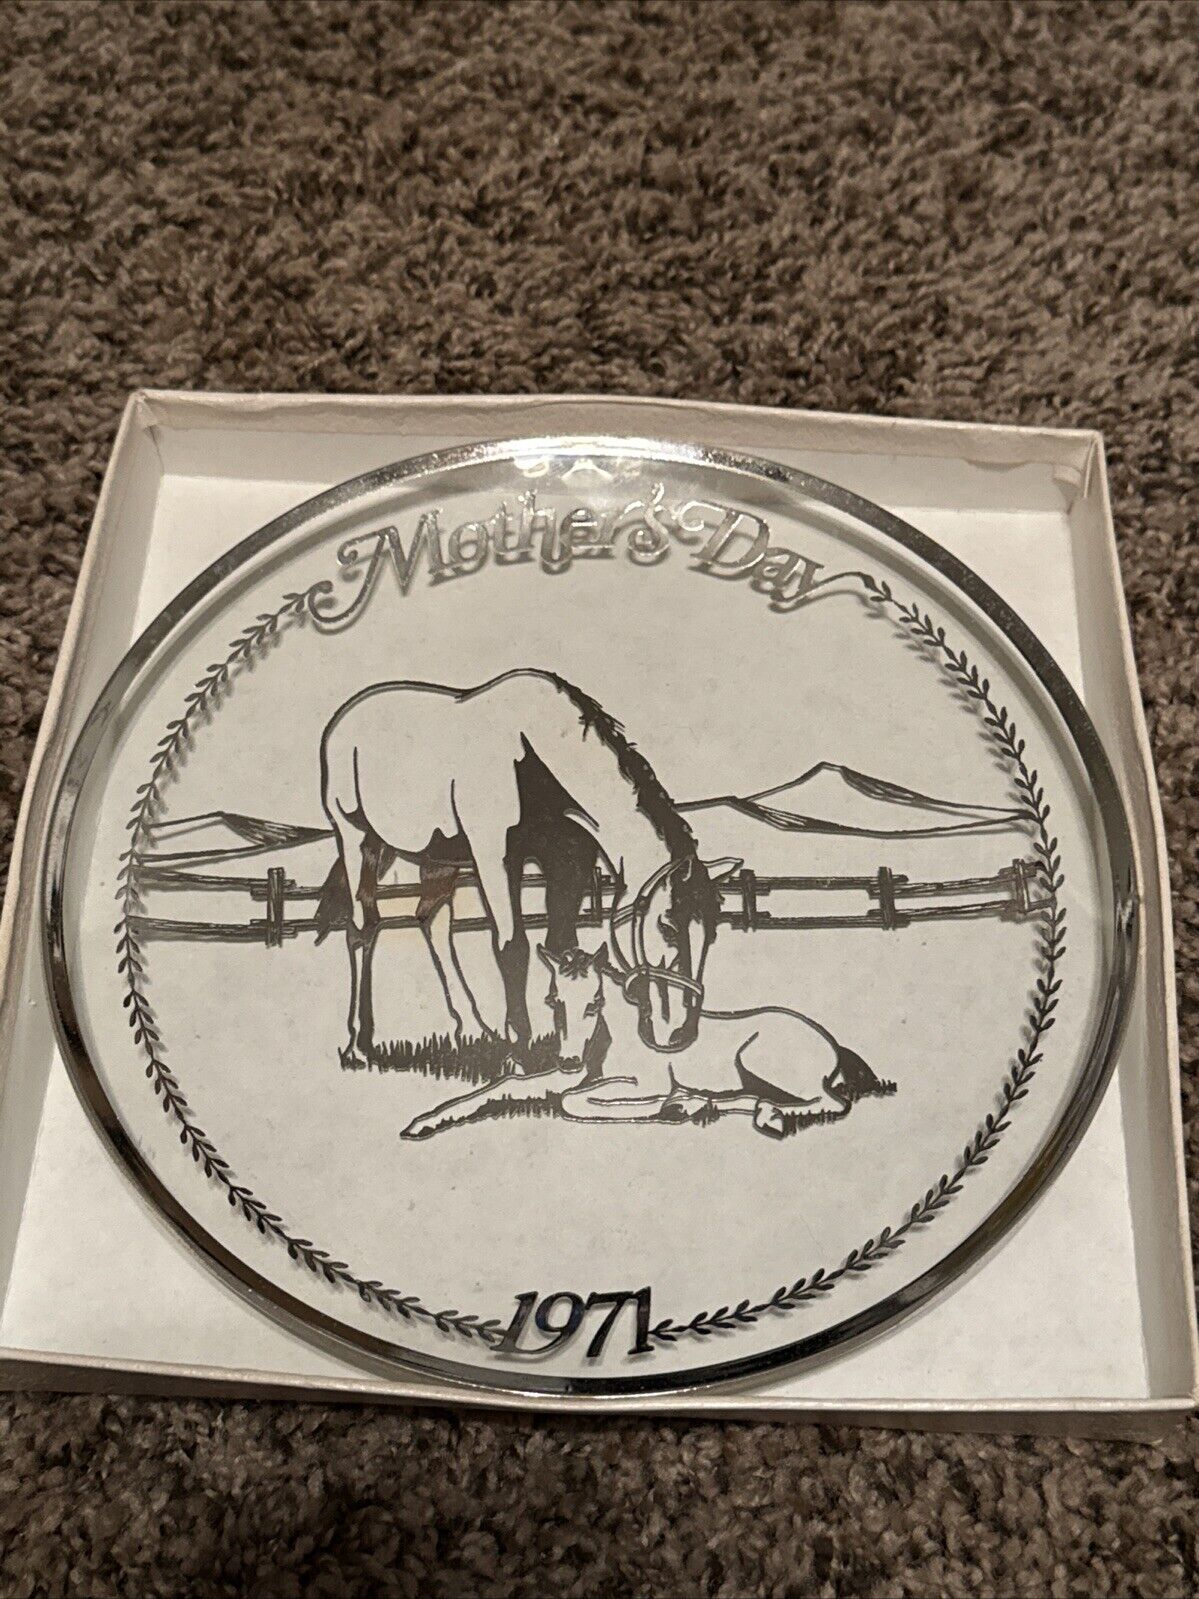 VINTAGE STERLING SILVER ON CRYSTAL PLATE MOTHERS DAY 1971 WITH HORSE IMAGES